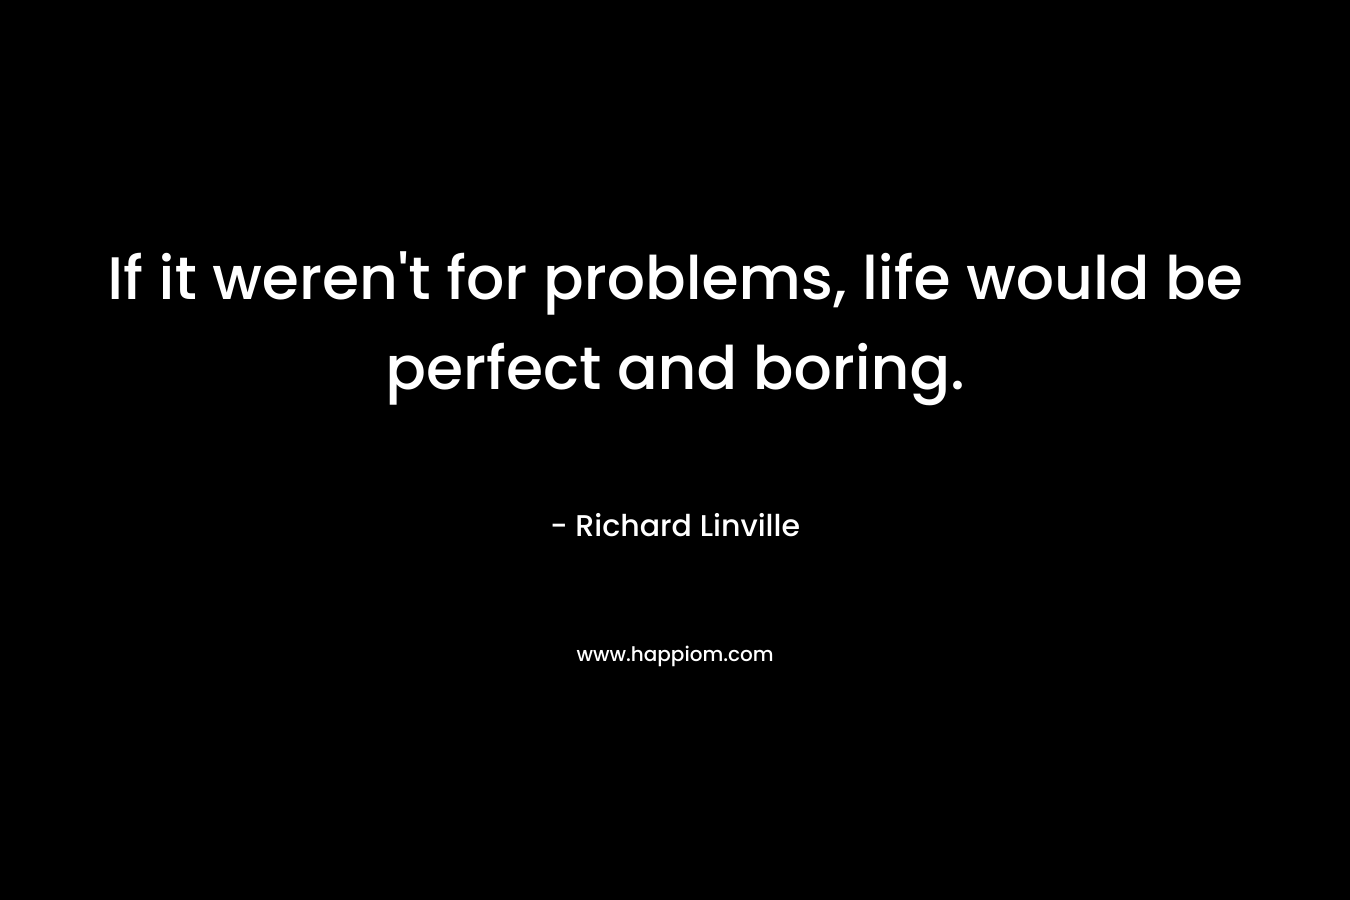 If it weren't for problems, life would be perfect and boring.